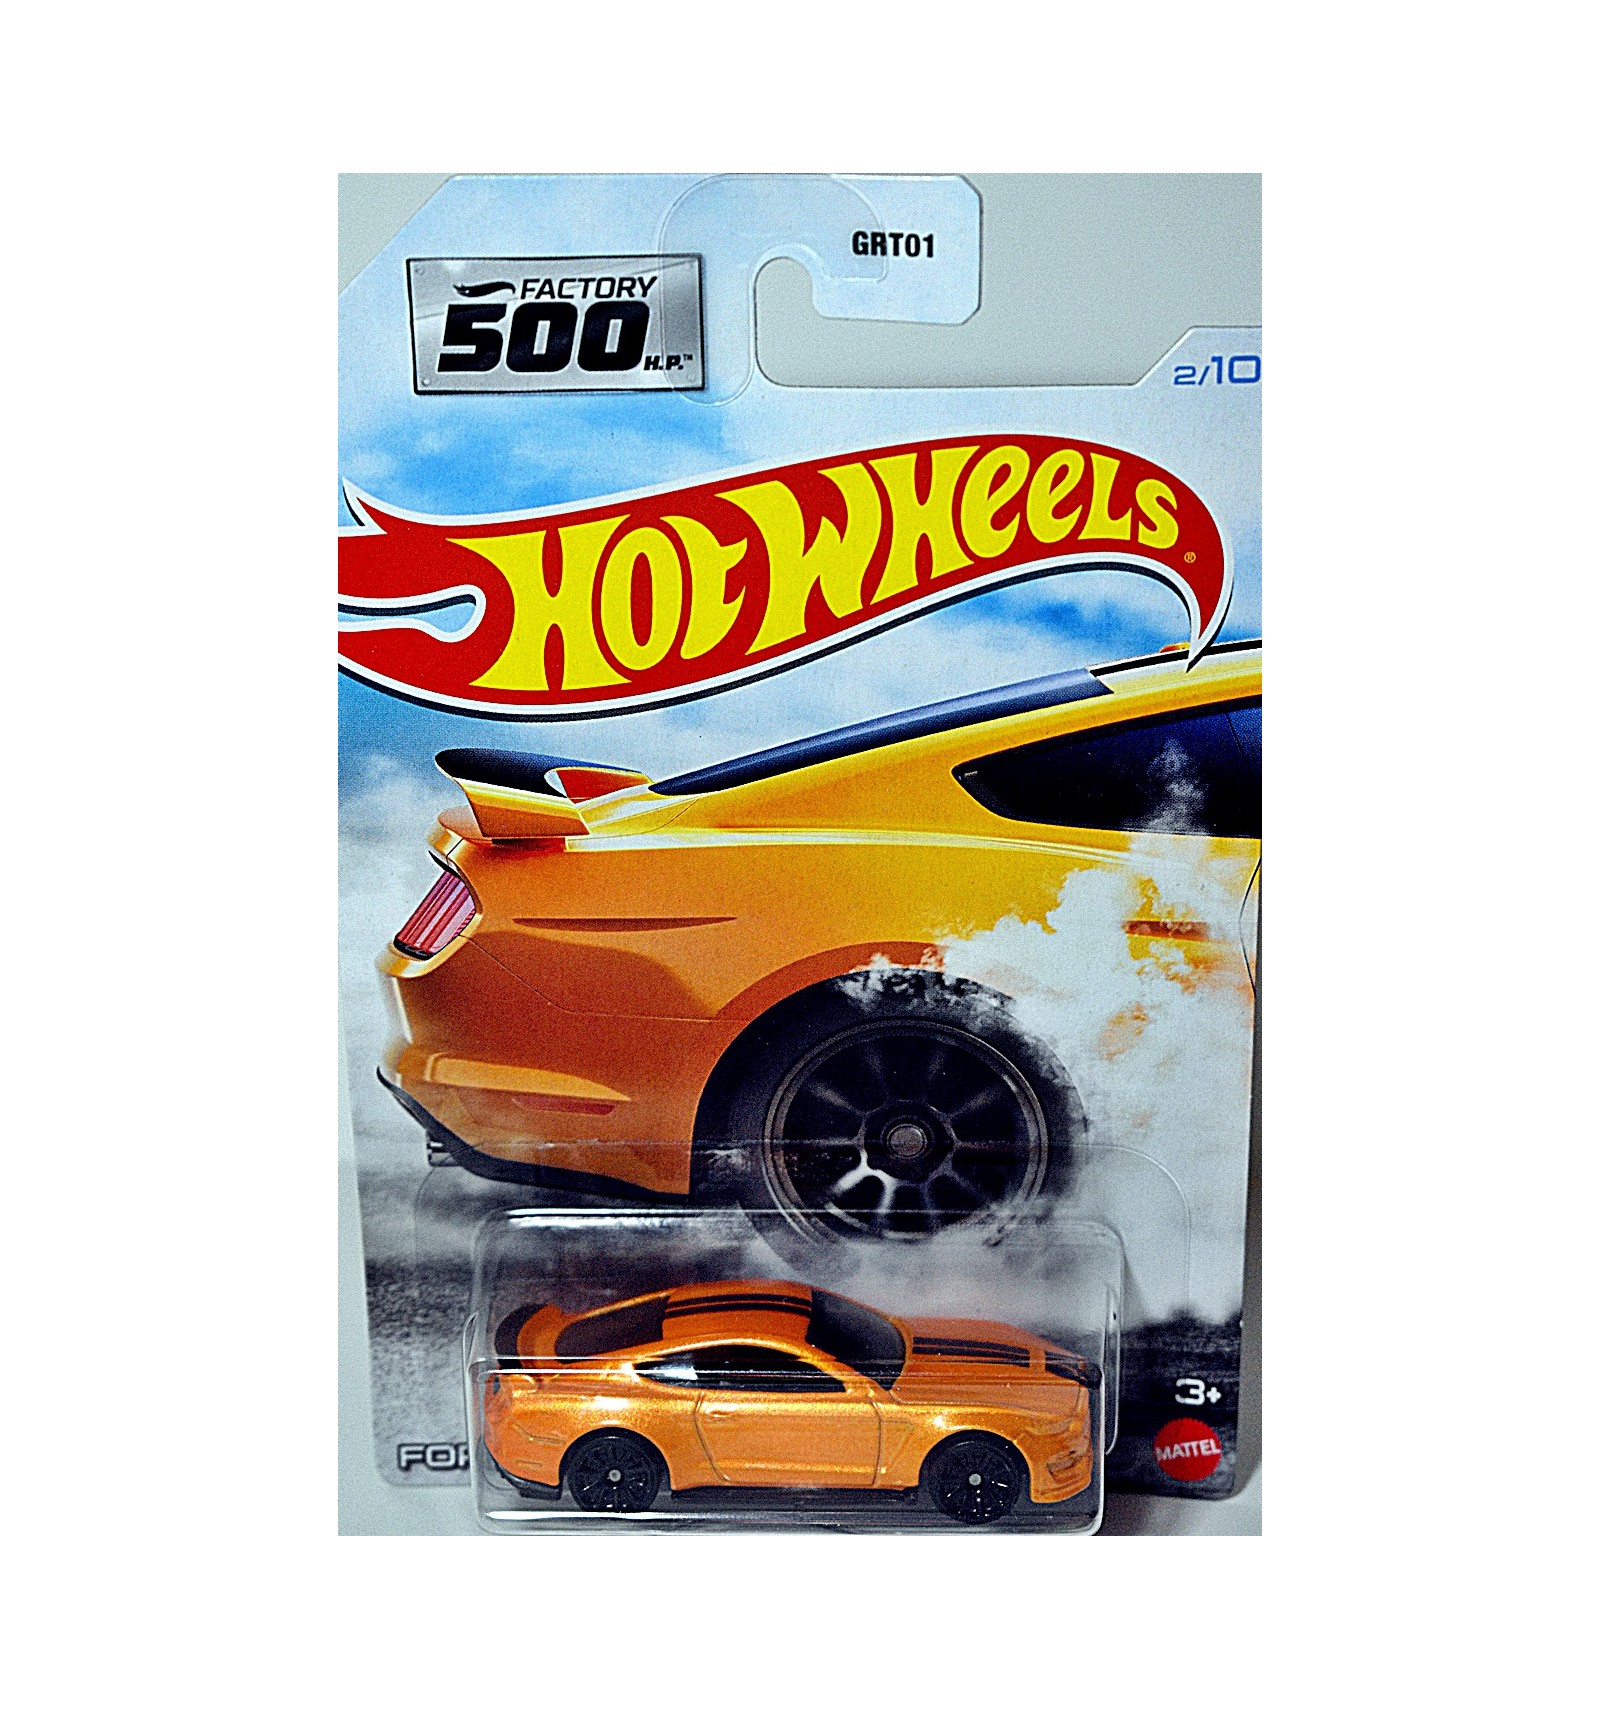 2/10 Orange Ford Shelby GT350R Details about   Hot Wheels 2021 HW Factory 500 H.P 